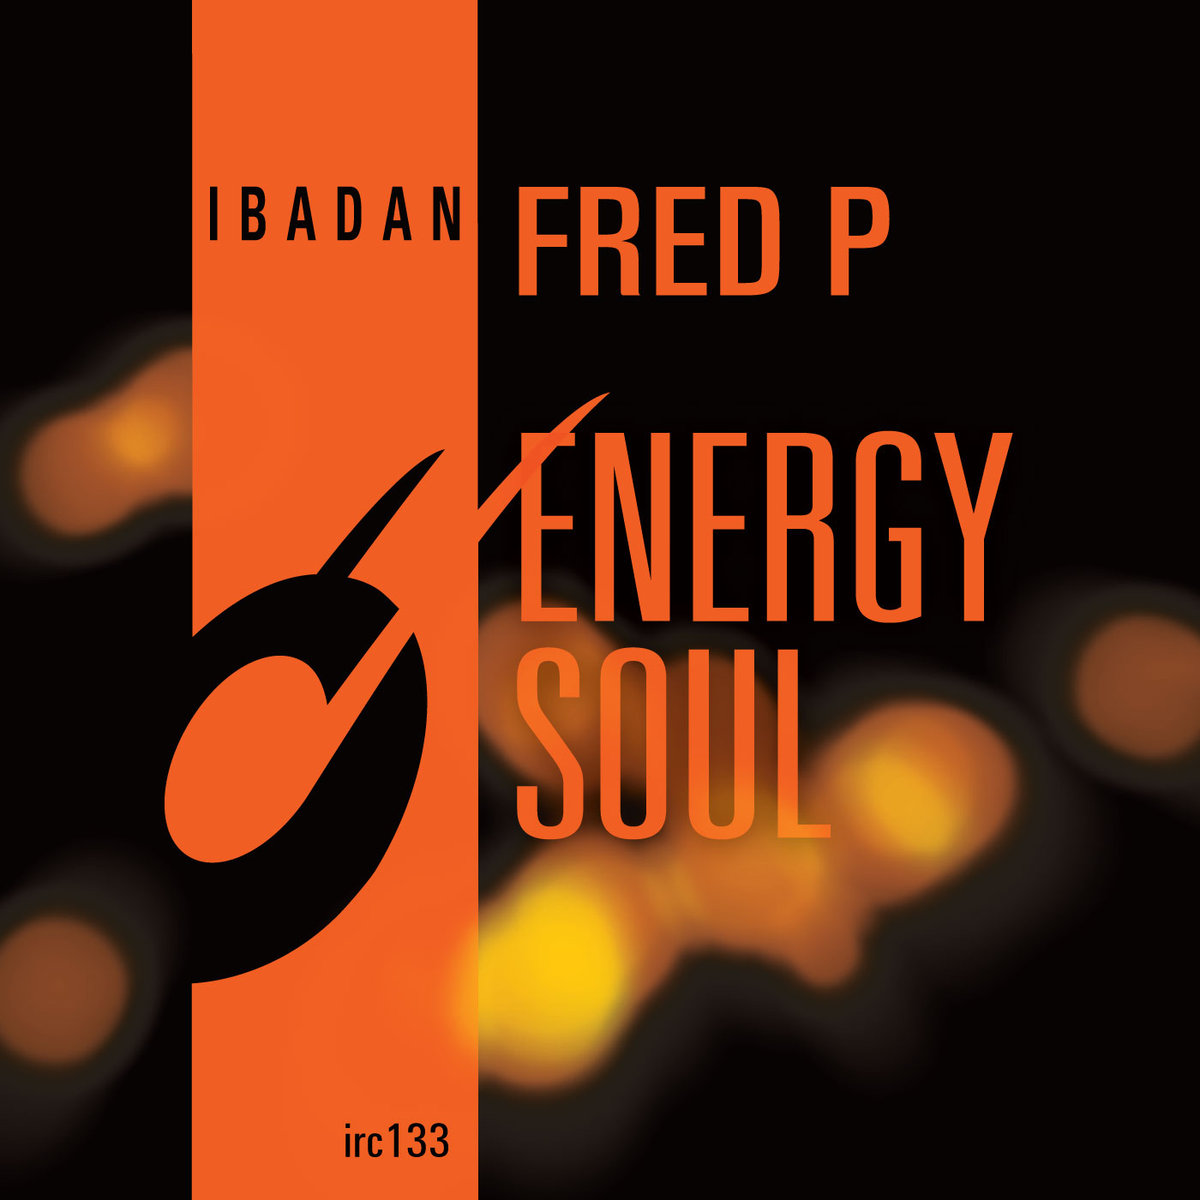 Fred P - Energy Soul / irc133